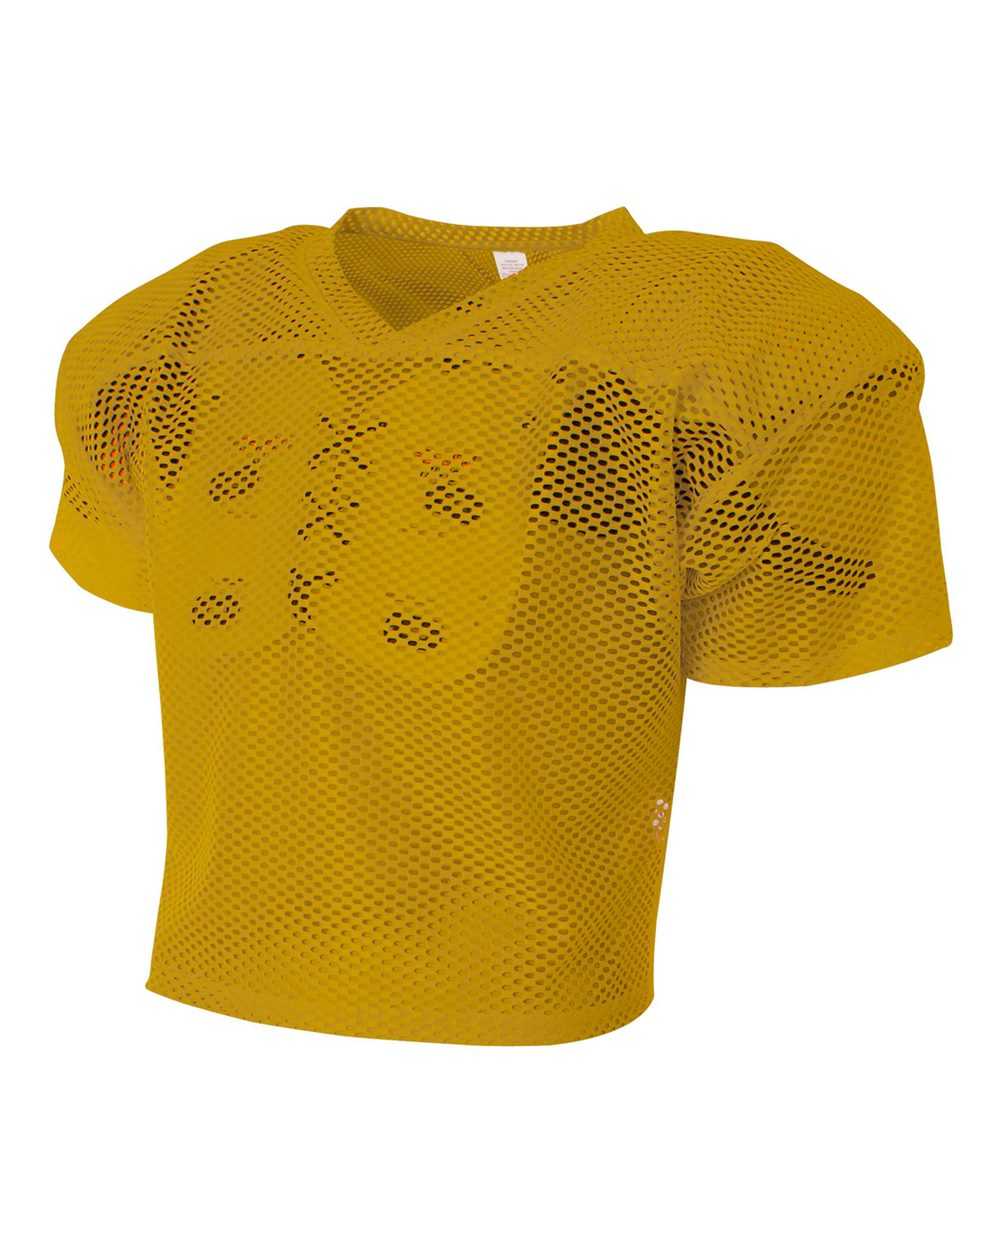 A4 NB4190 Youth Porthole Practice Jersey - Gold - M